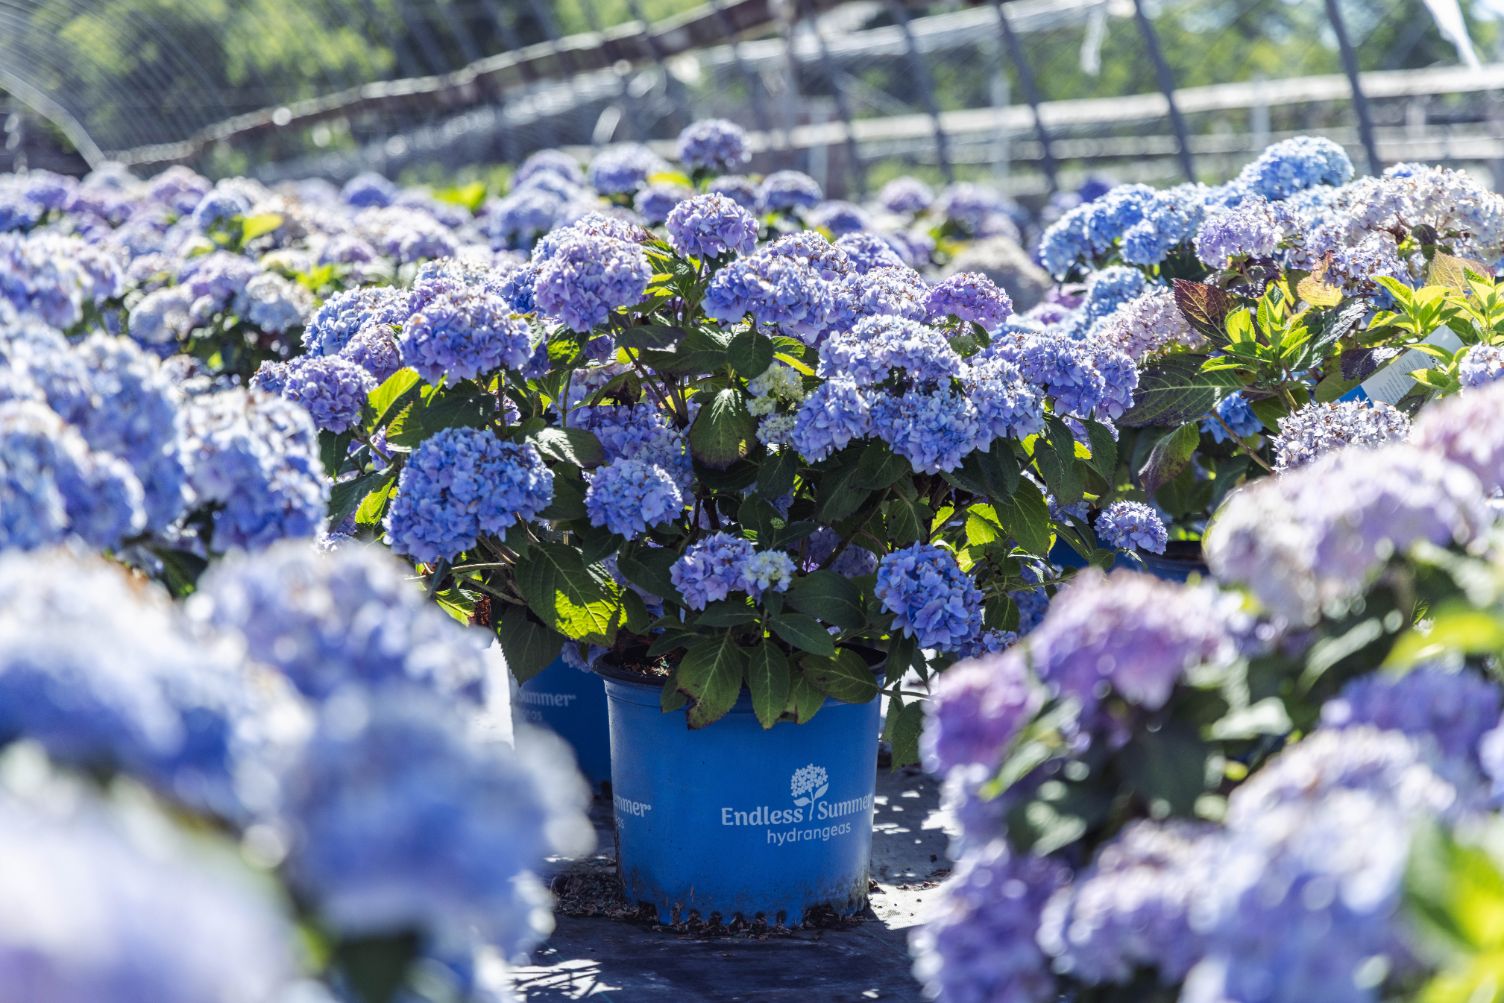 Containers of Endless Summer Hydrangeas